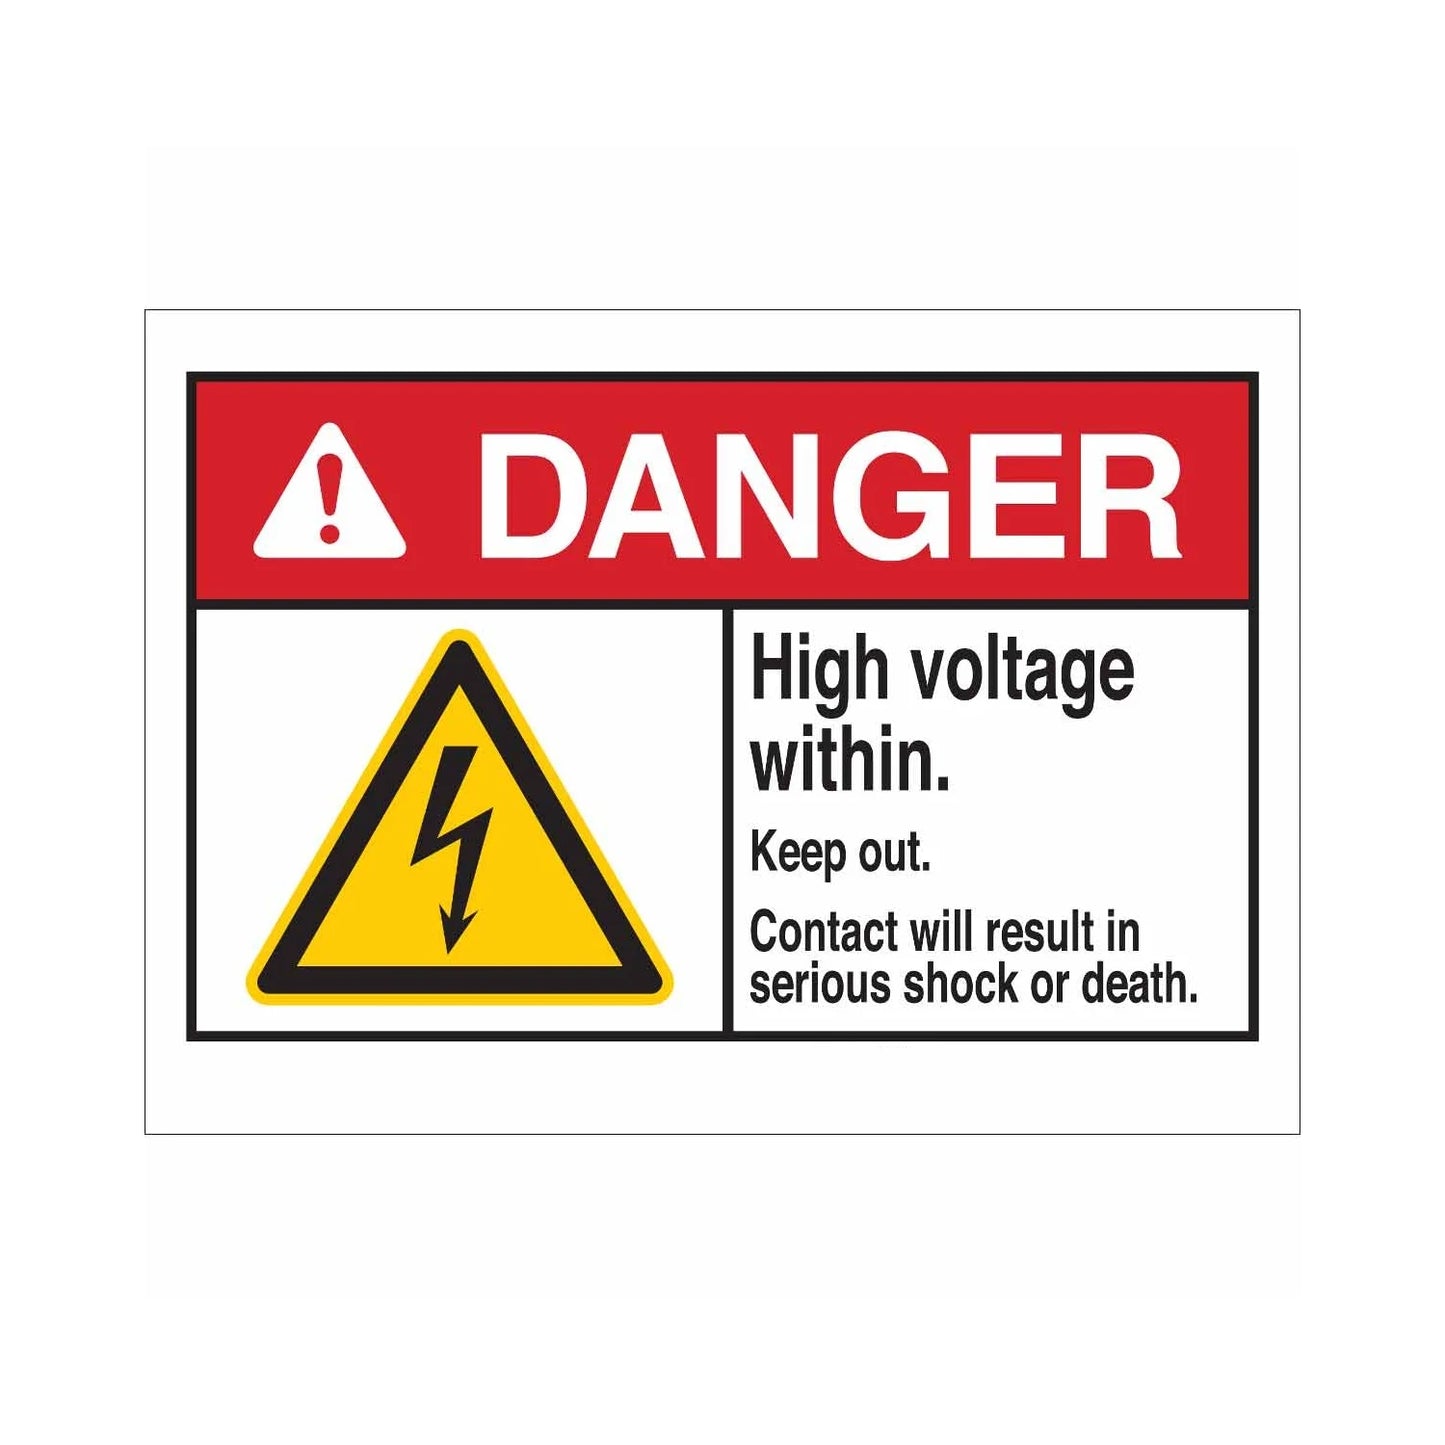 DANGER High Voltage Within. Keep Out. Contact Will Result In Serious Shock Or Death. Sign